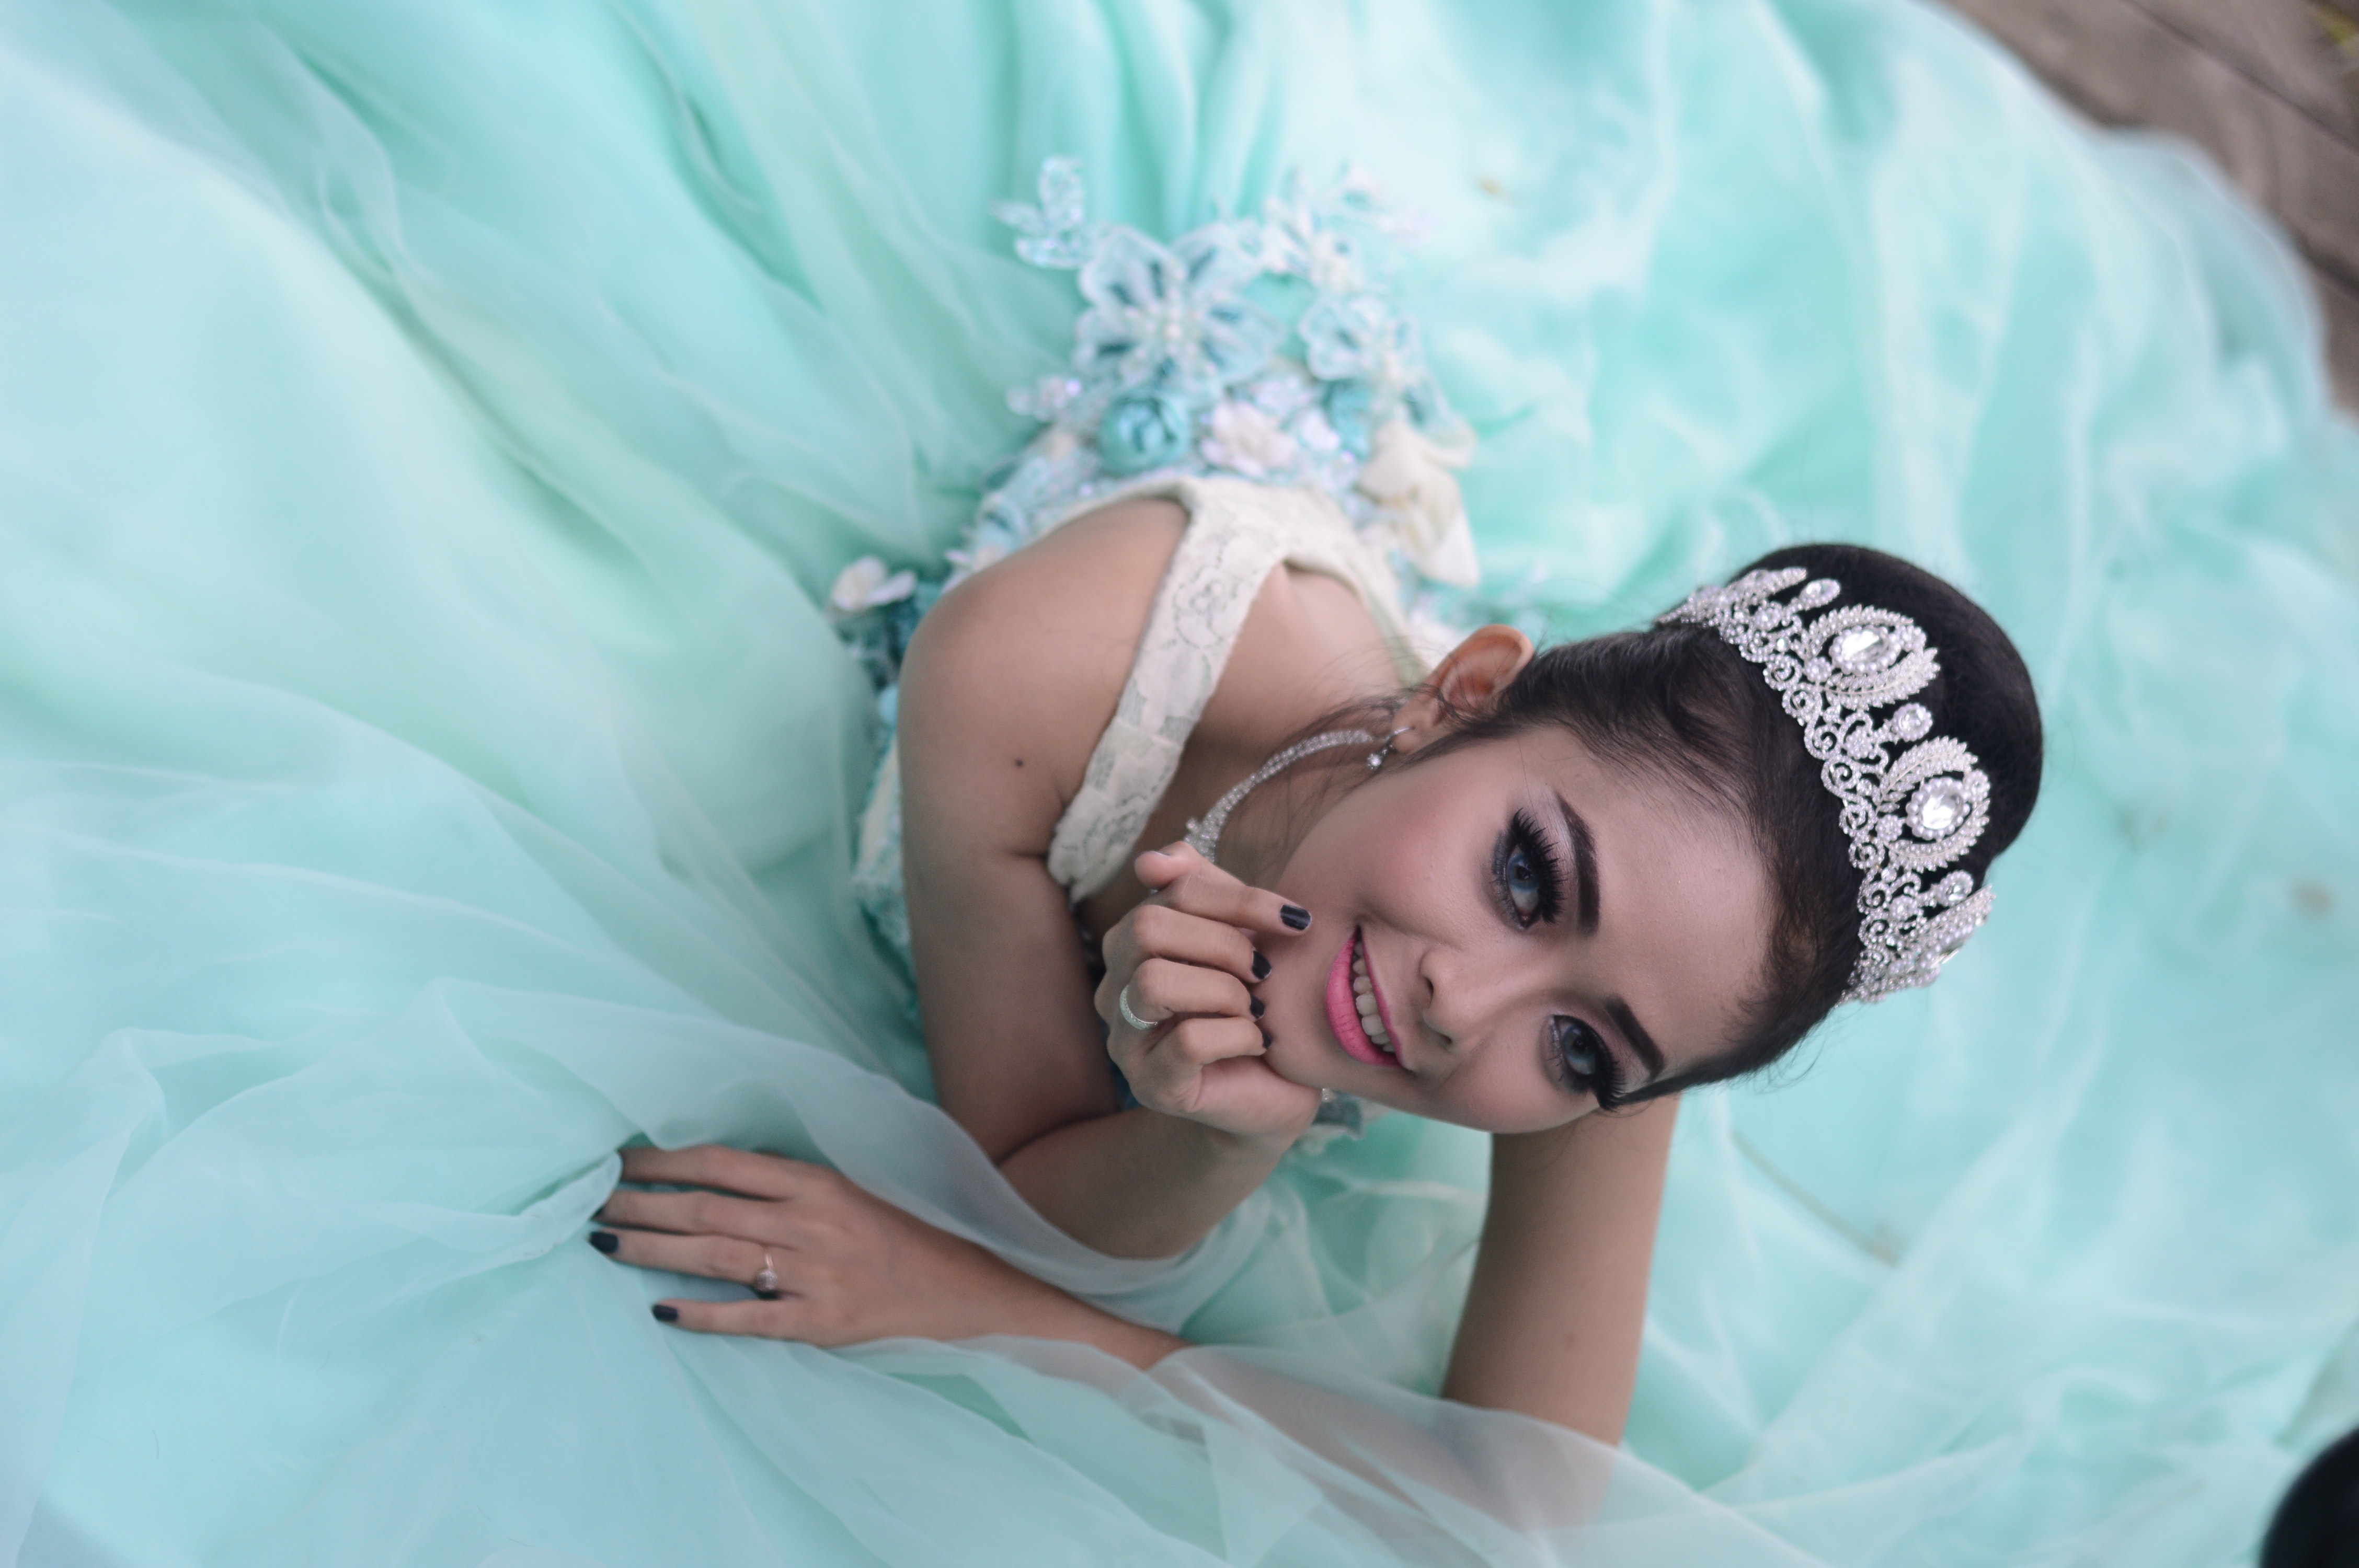 Woman Wears Teal Chiffon Gown and Crown, Accessories, Photoshoot, Woman, Wear, HQ Photo